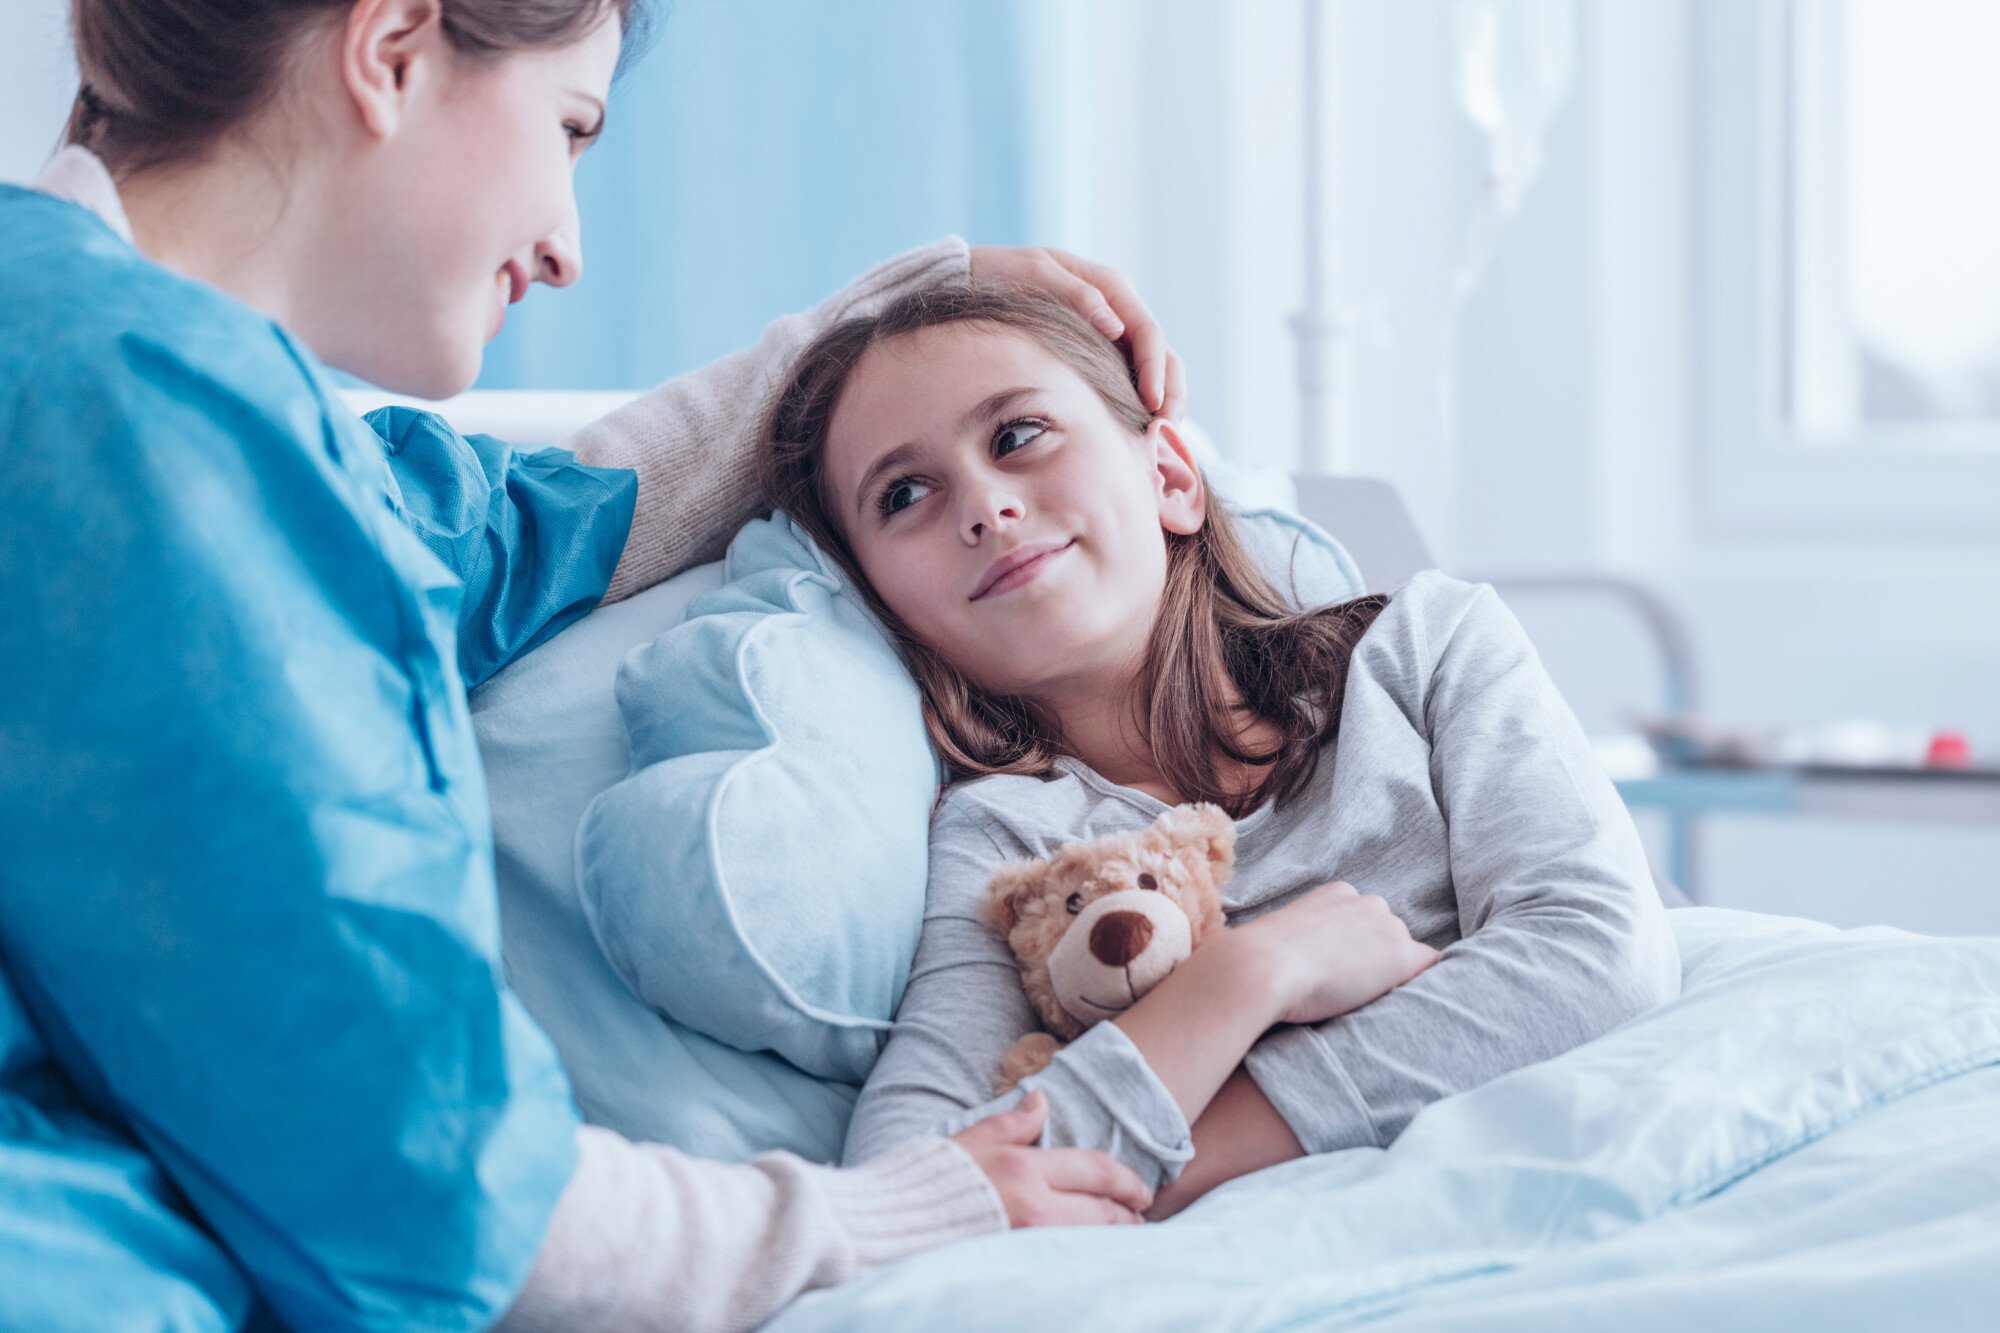 Are you looking for a primary care doctor for your child? Read here for seven tips for finding a pediatric direct primary care provider.